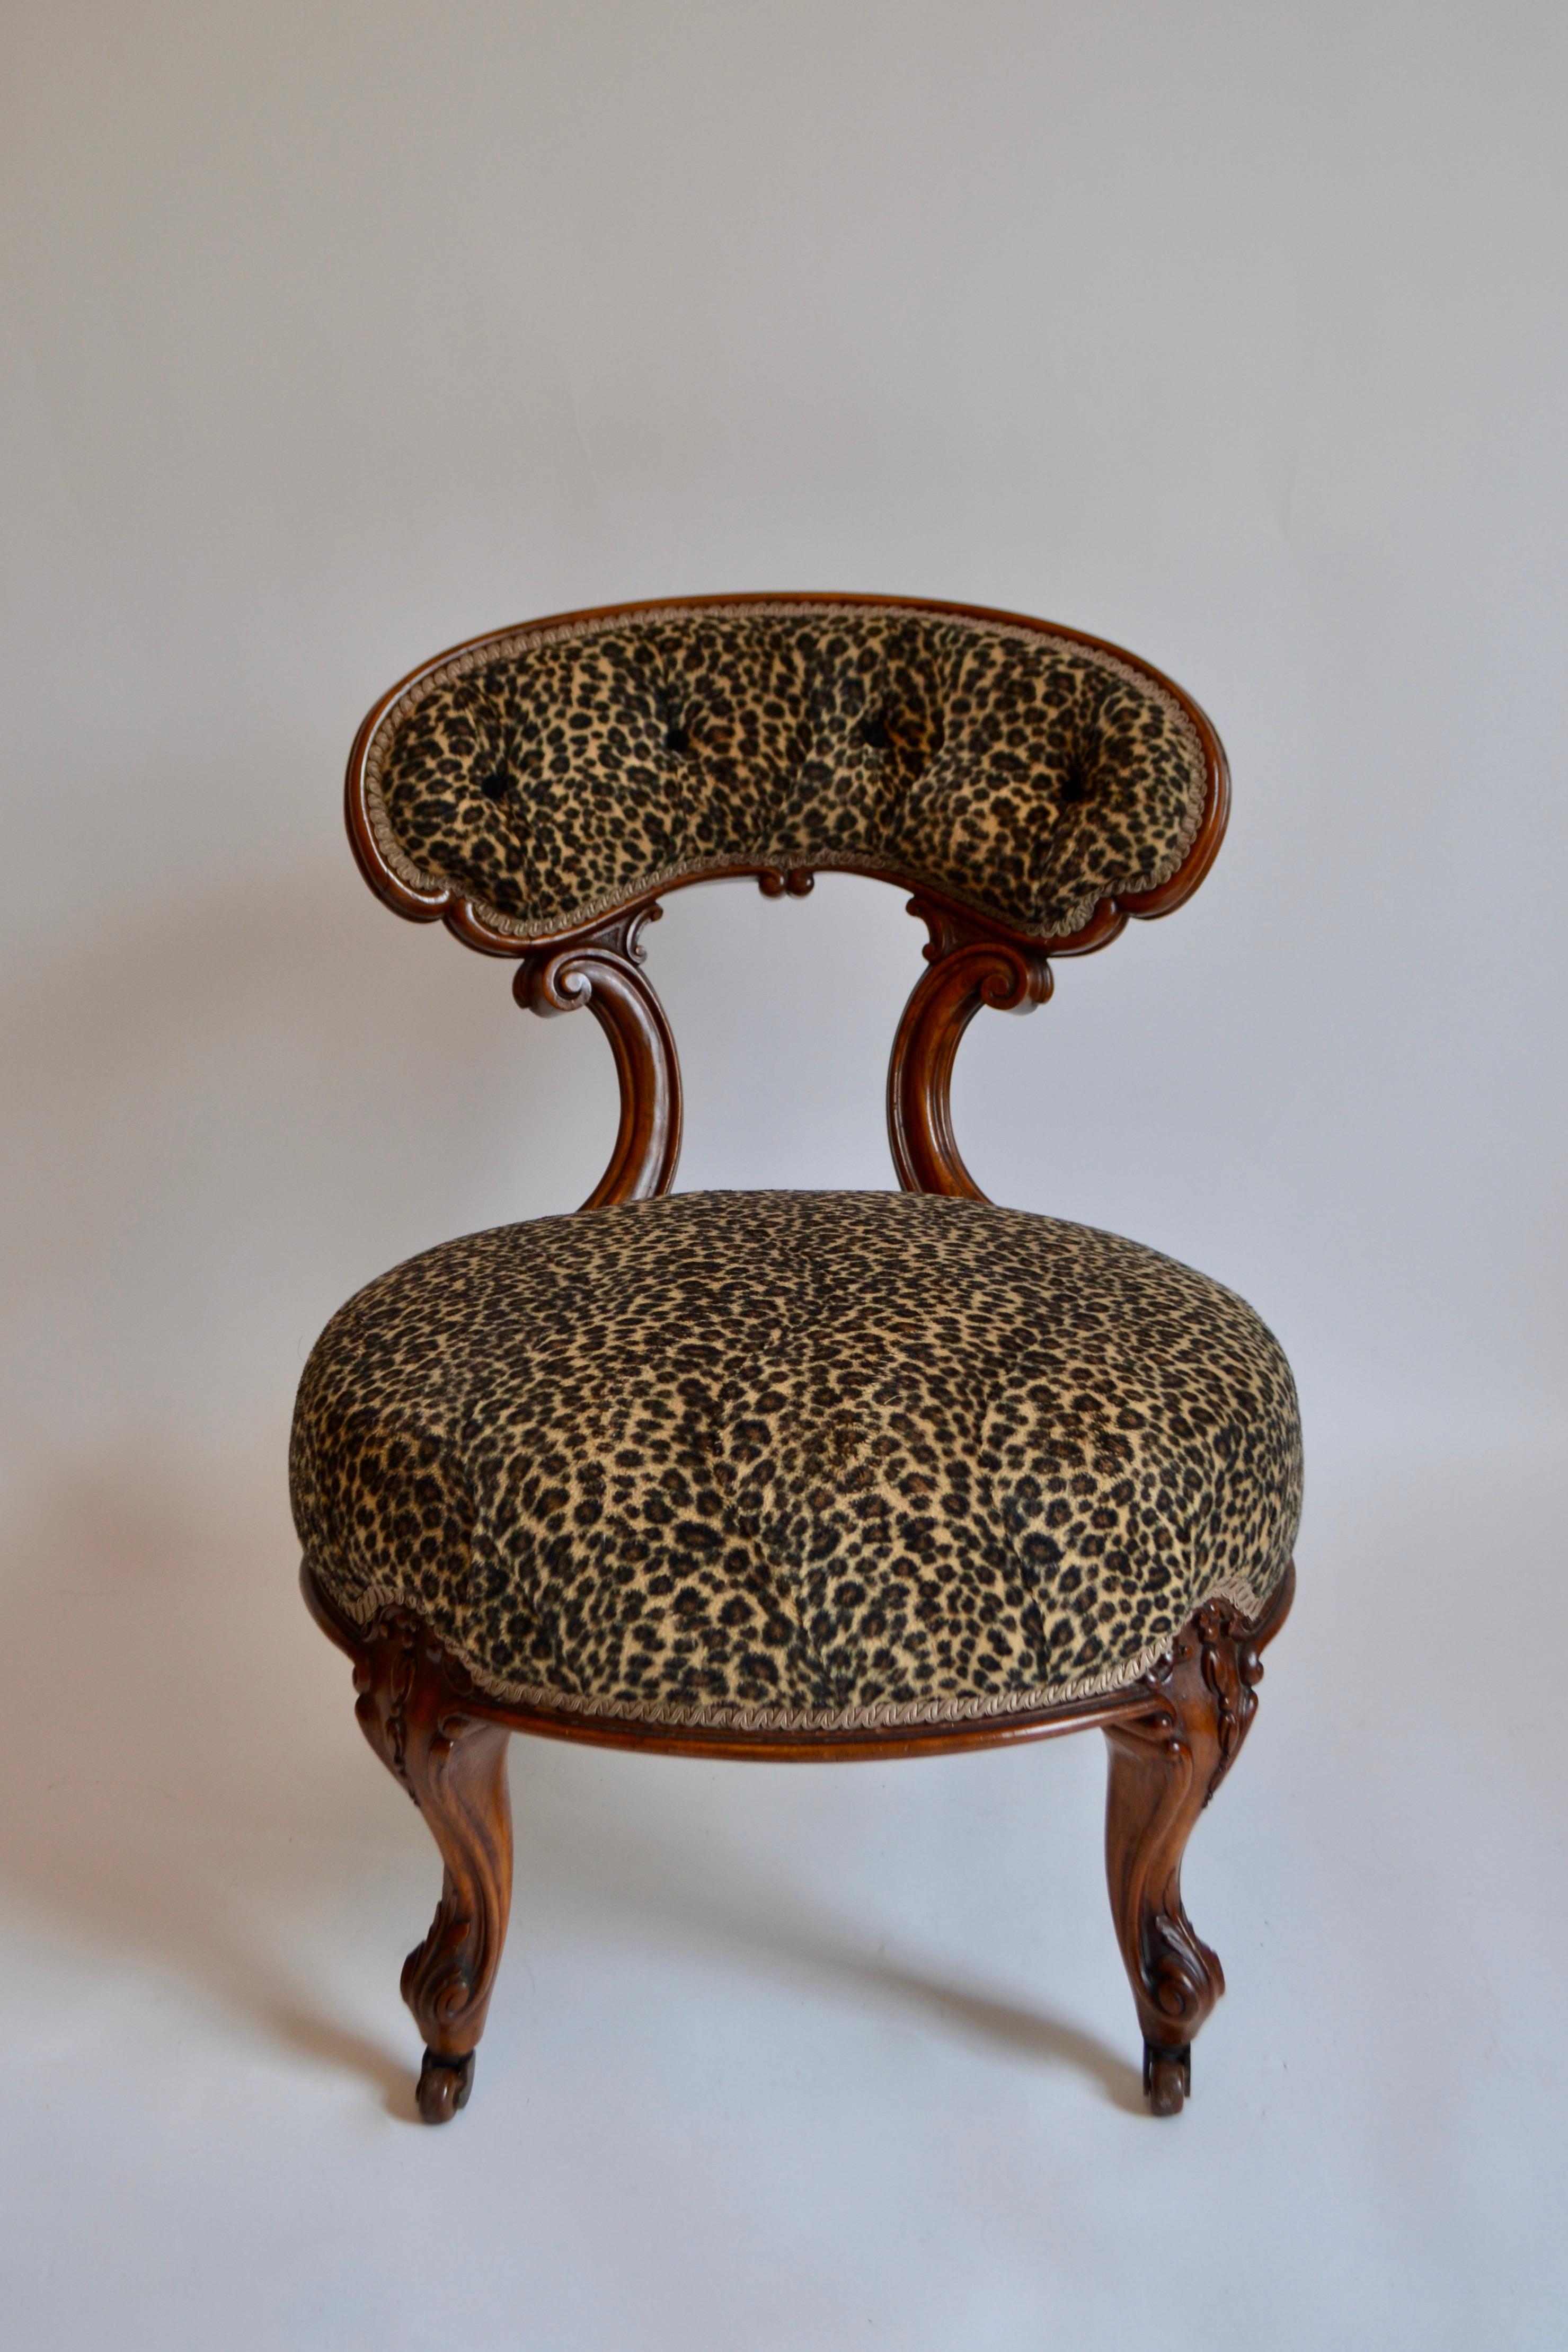 Fabric Pair of Victorian Walnut Chairs Upholstered in Faux Leopard Skin, 19th Century For Sale